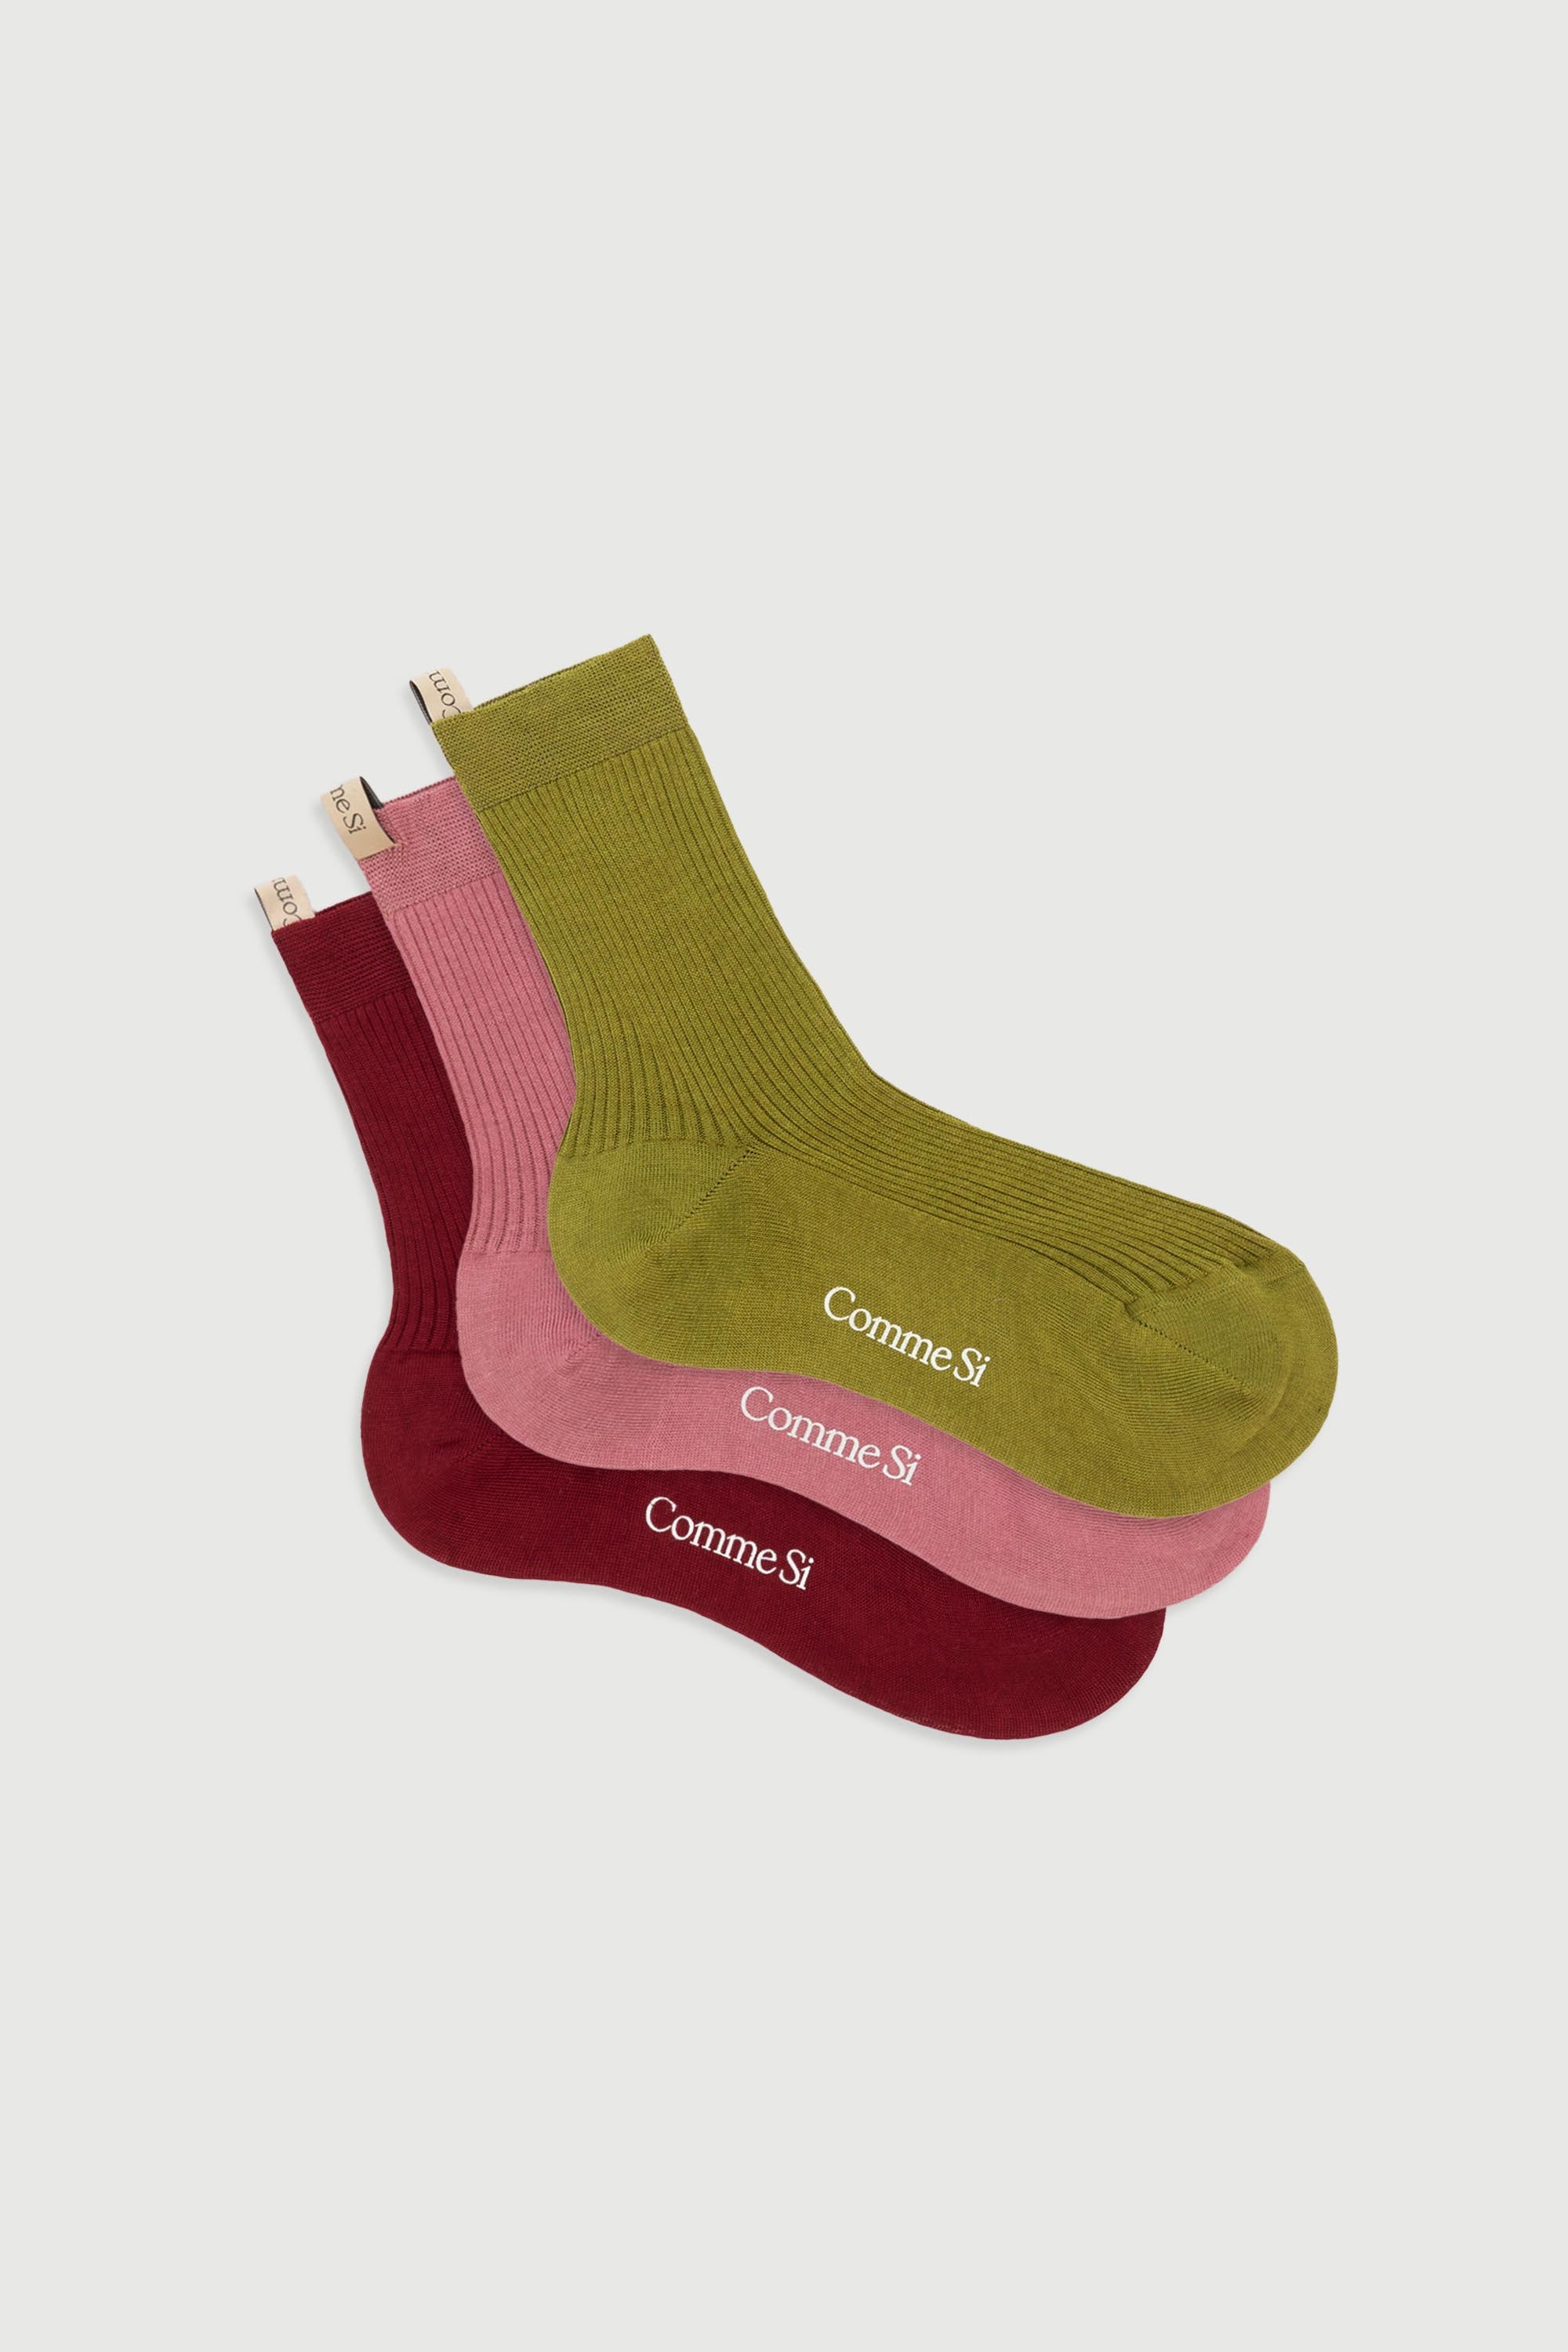 The Agnelli Trio, Egyptian Cotton Sock Set of three pairs in Somerset, by Comme Si